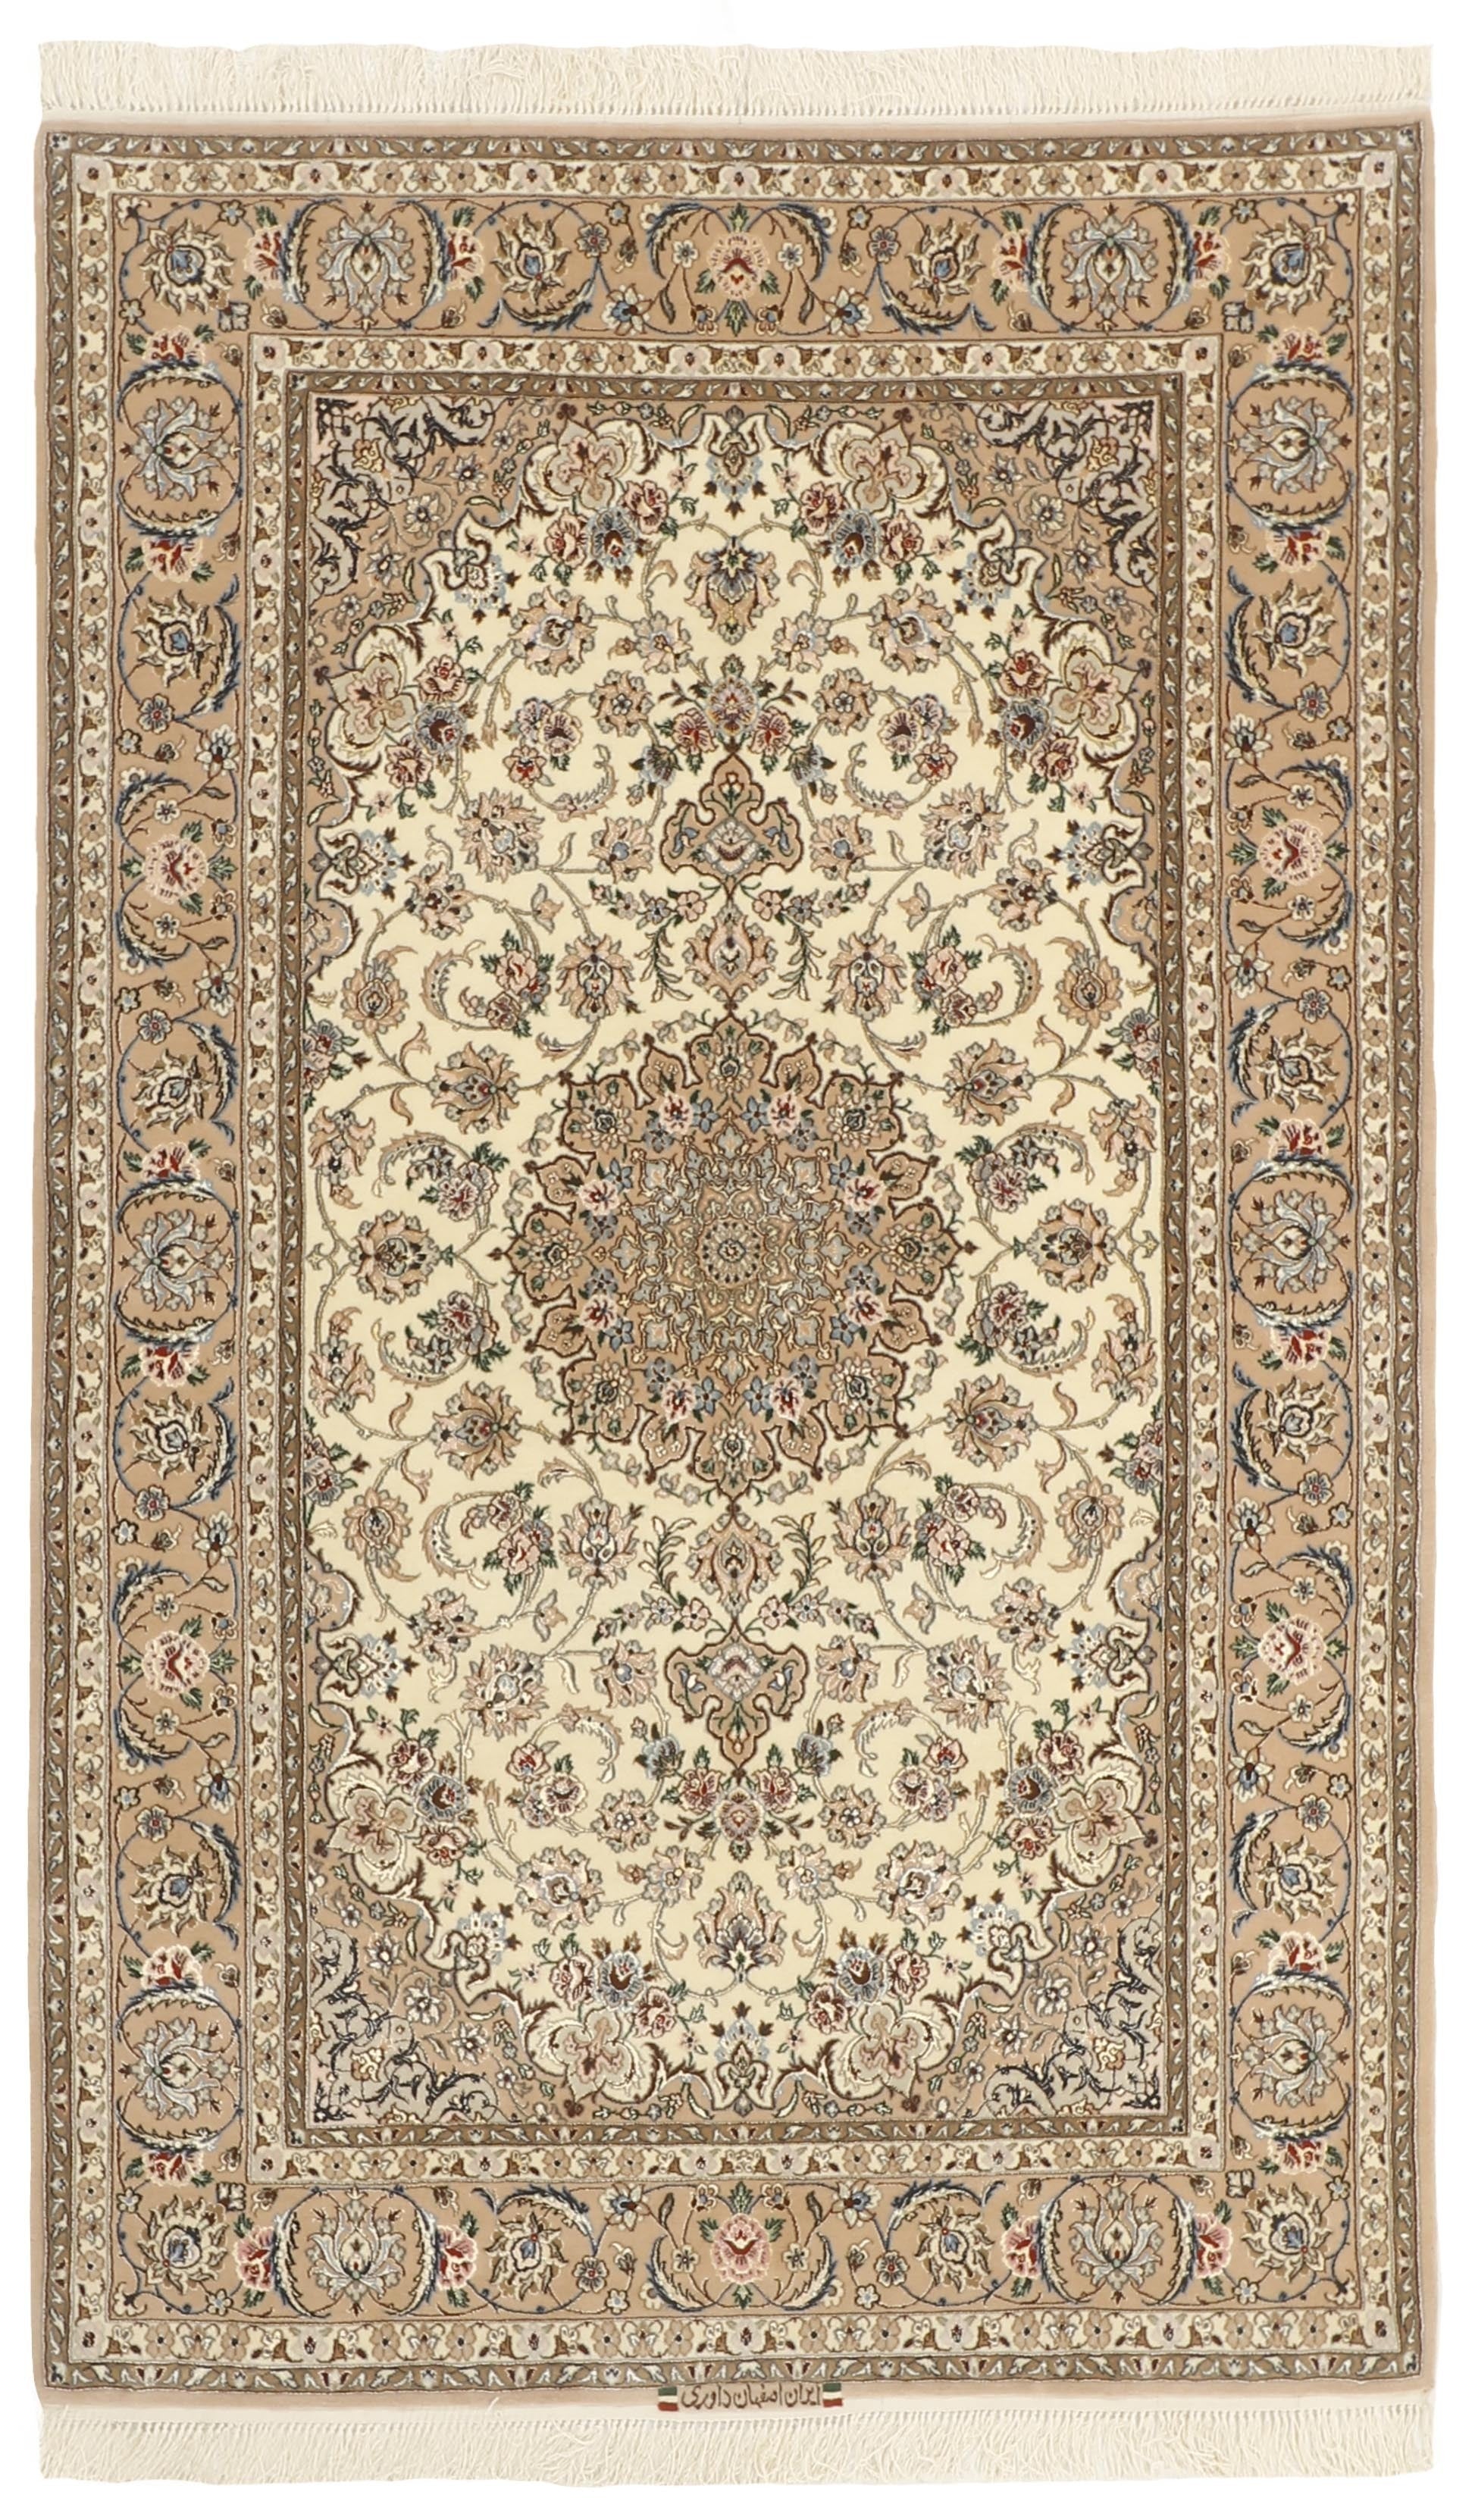 Authentic persian rug with traditional pattern in red, blue and beige